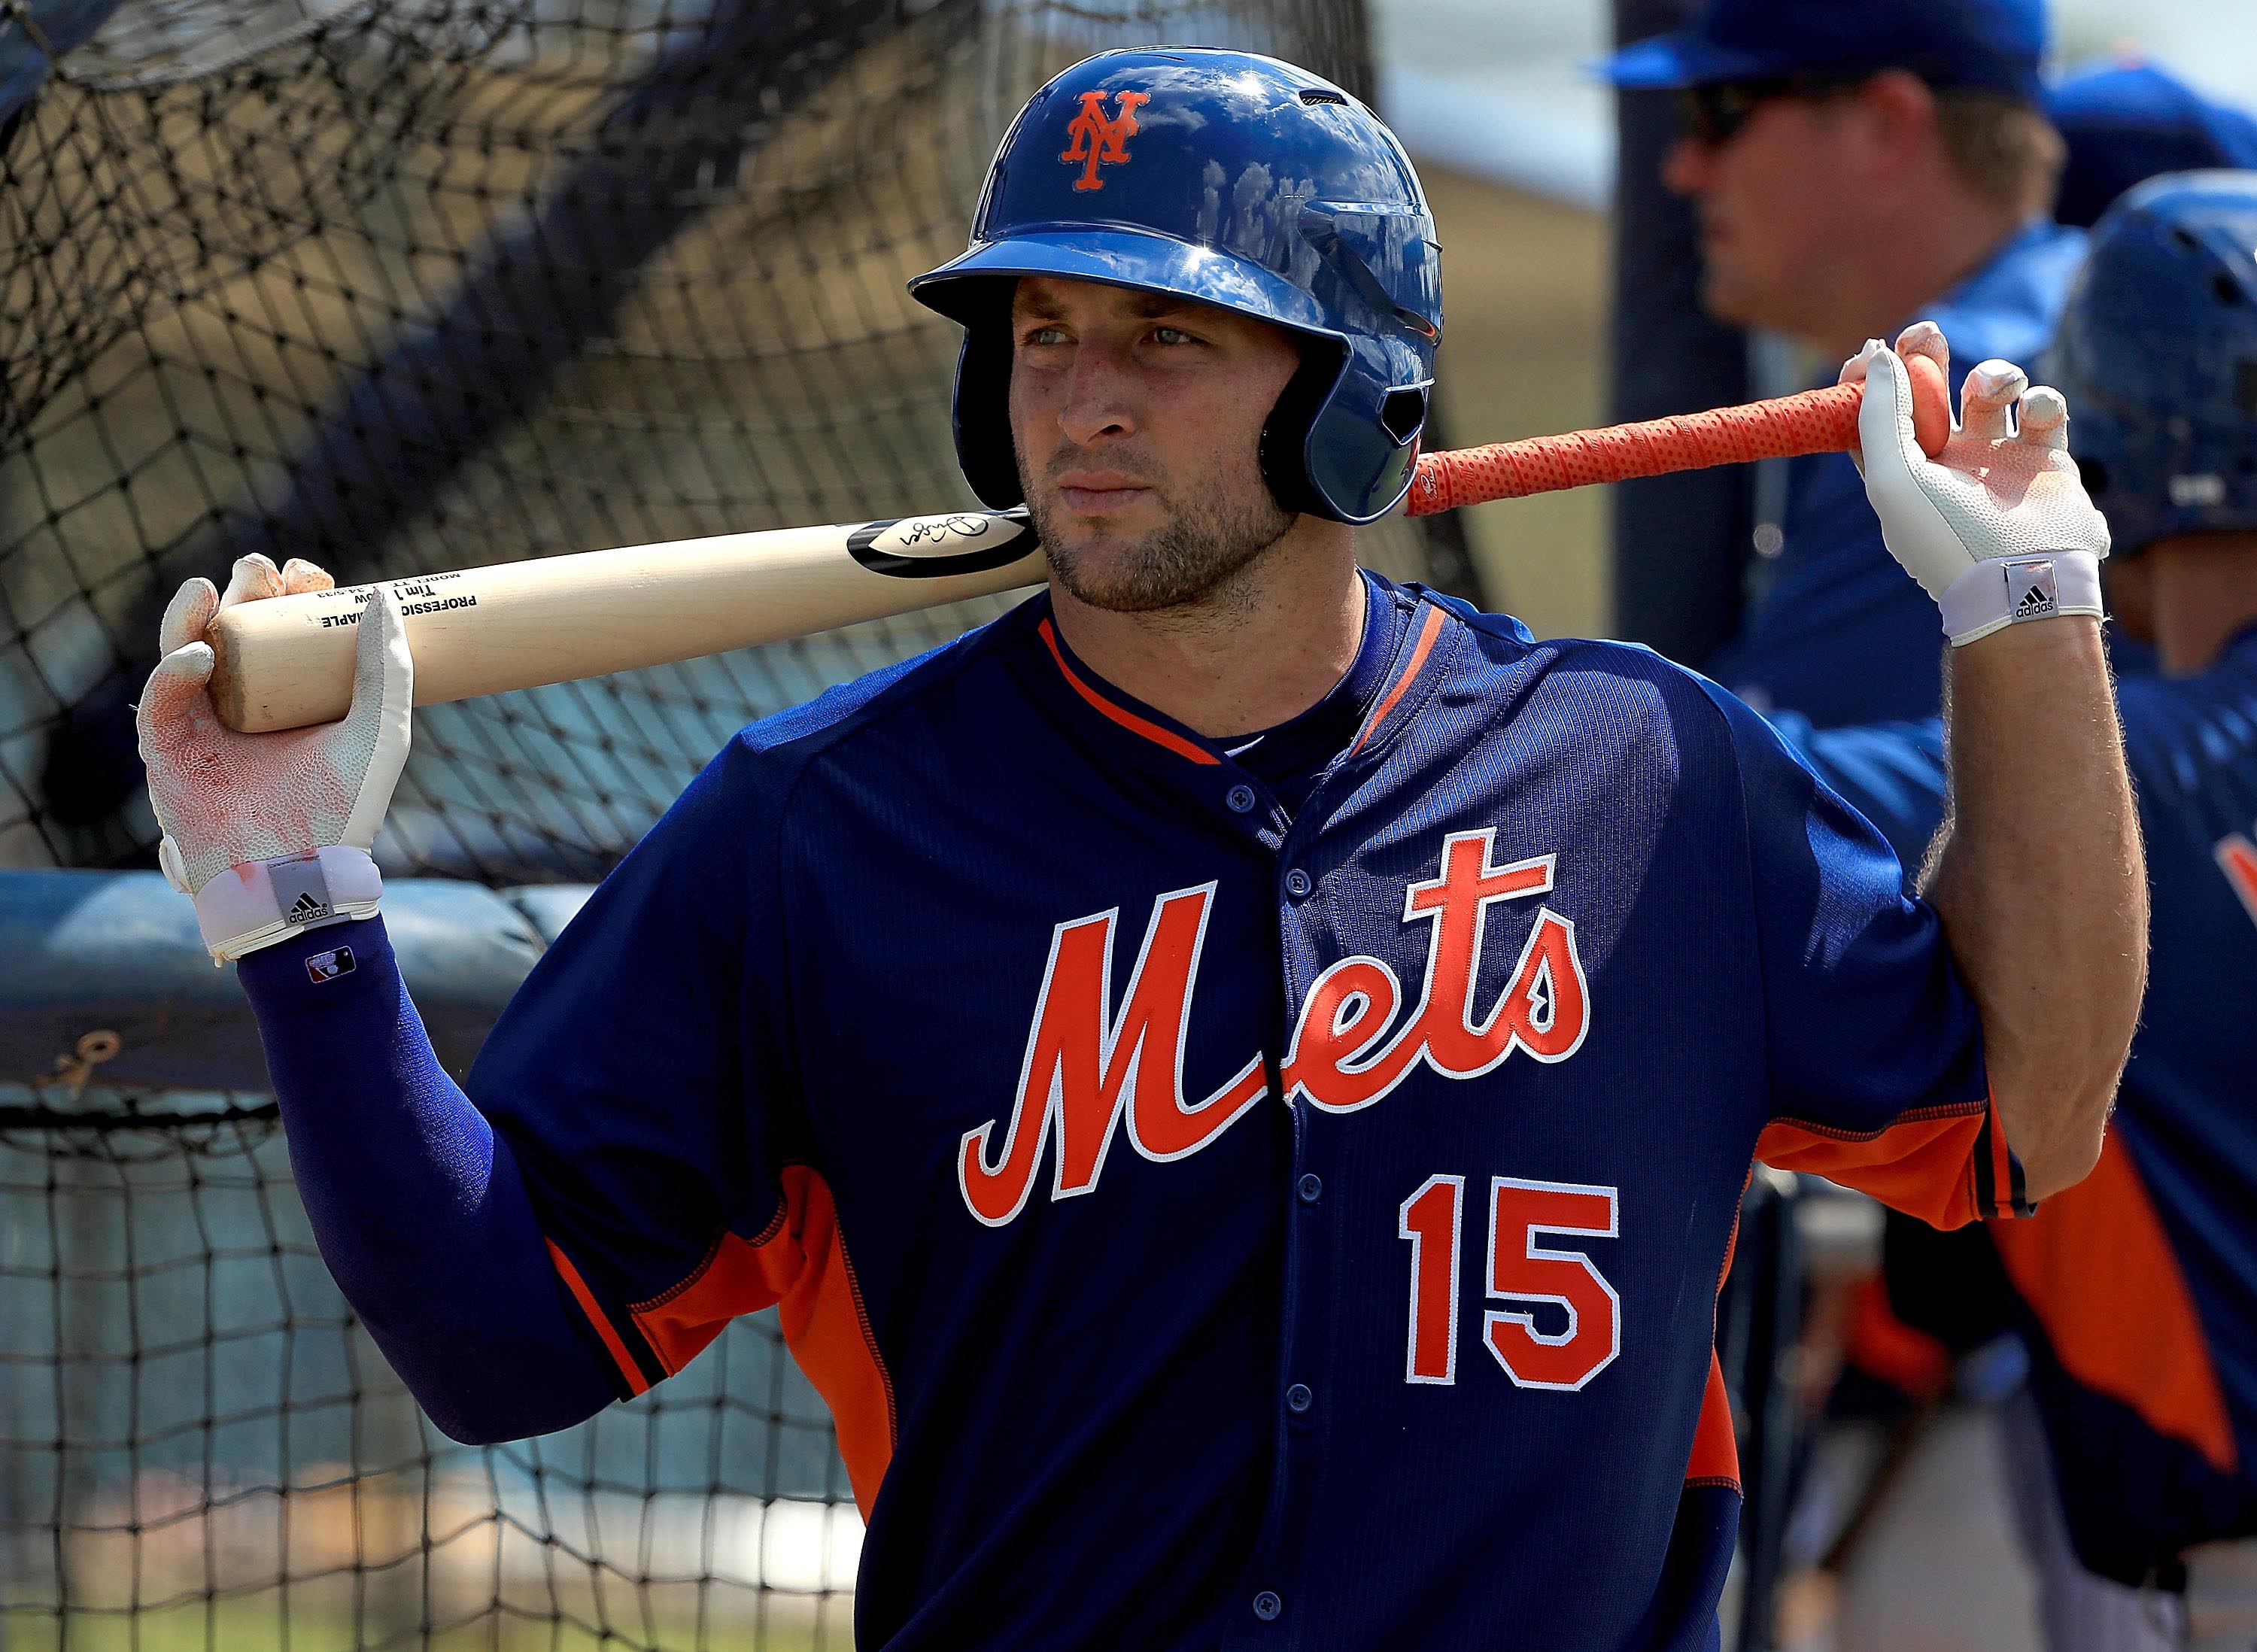 Tim Tebow retires from baseball after five years as minor leaguer